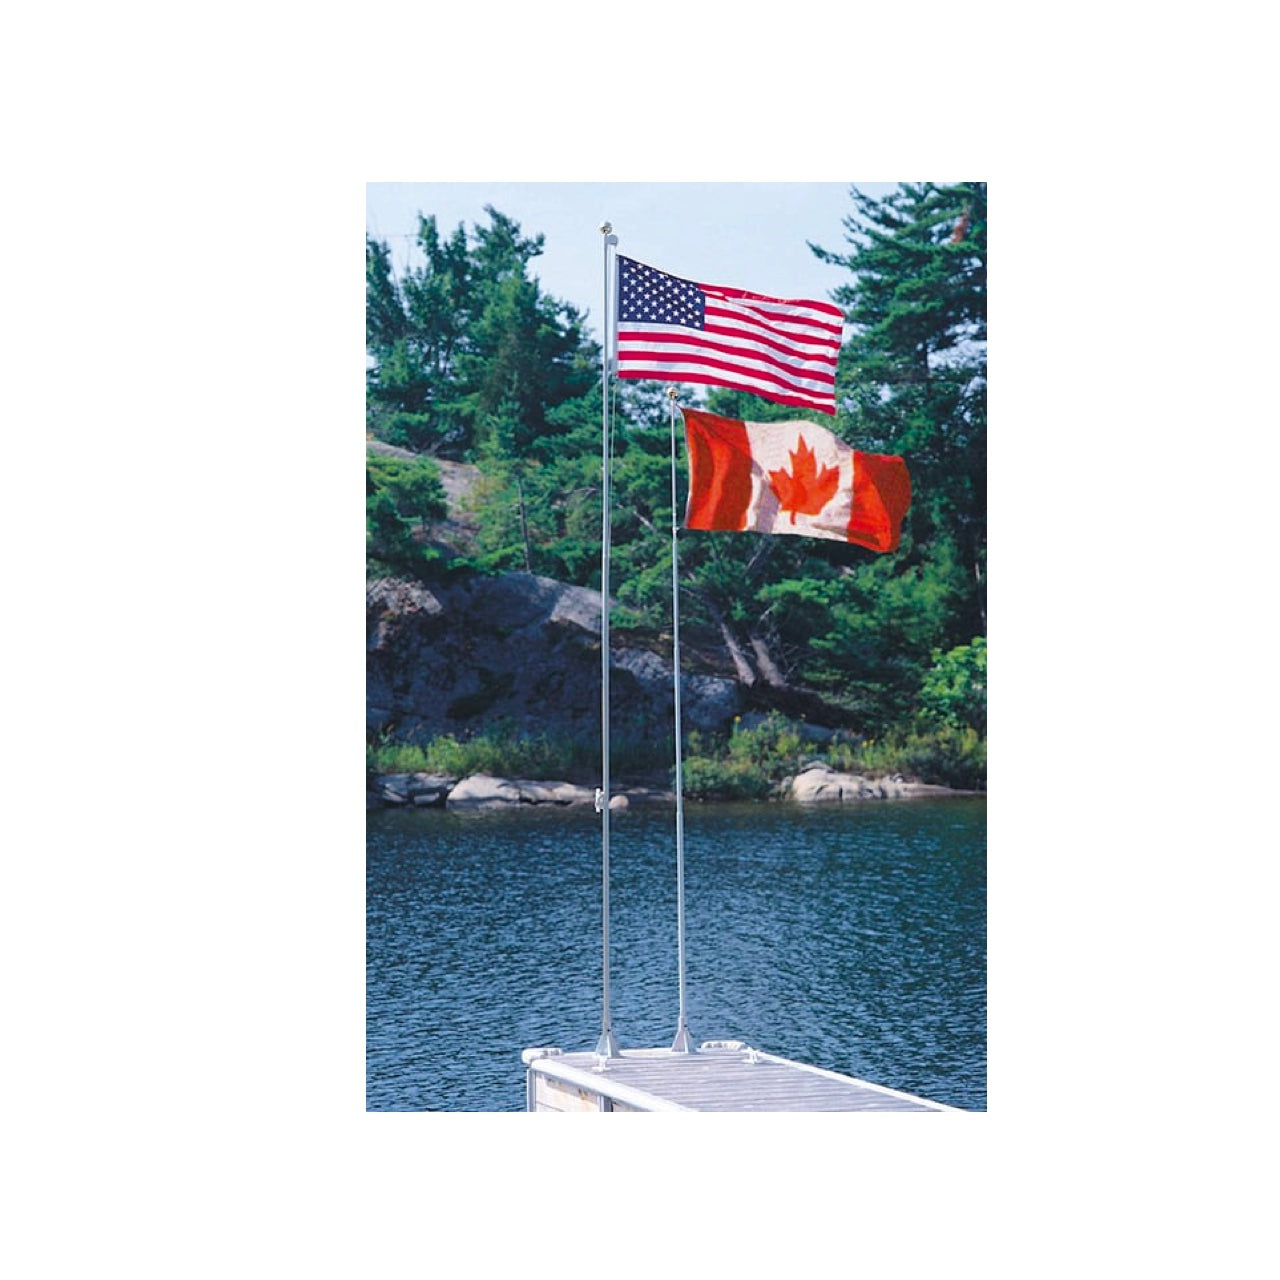 Dock Edge 21 foot Flexi-Flagpole with USA flag flying in the wind. white background.